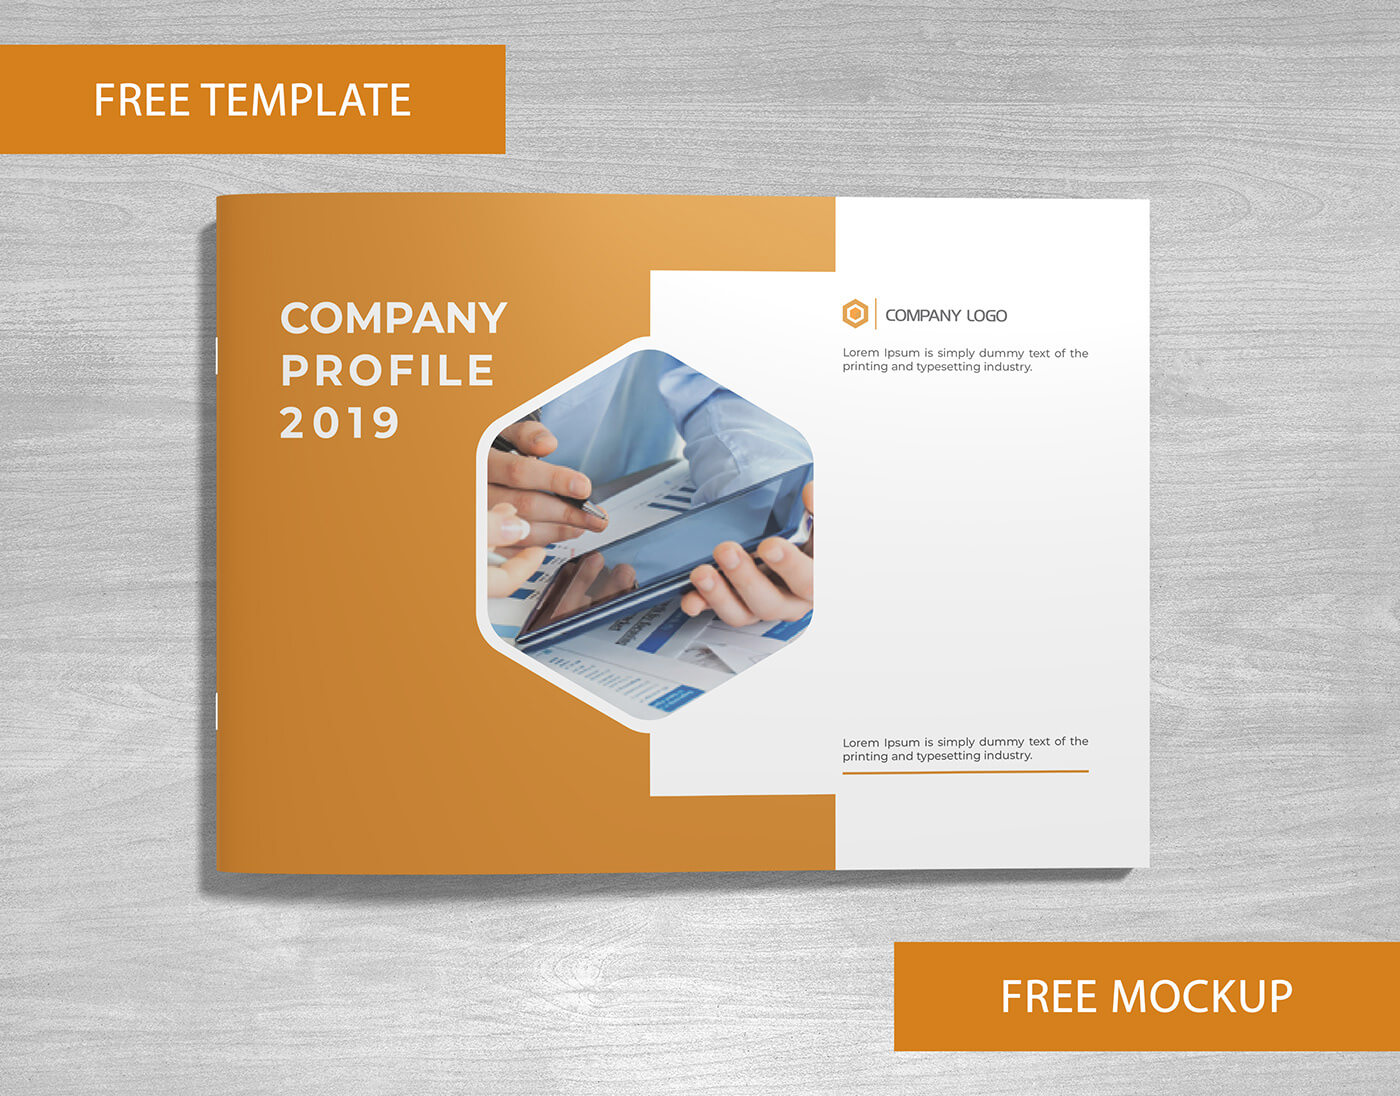 Company Profile Free Template And Mockup Download On Behance Intended For Free Brochure Template Downloads